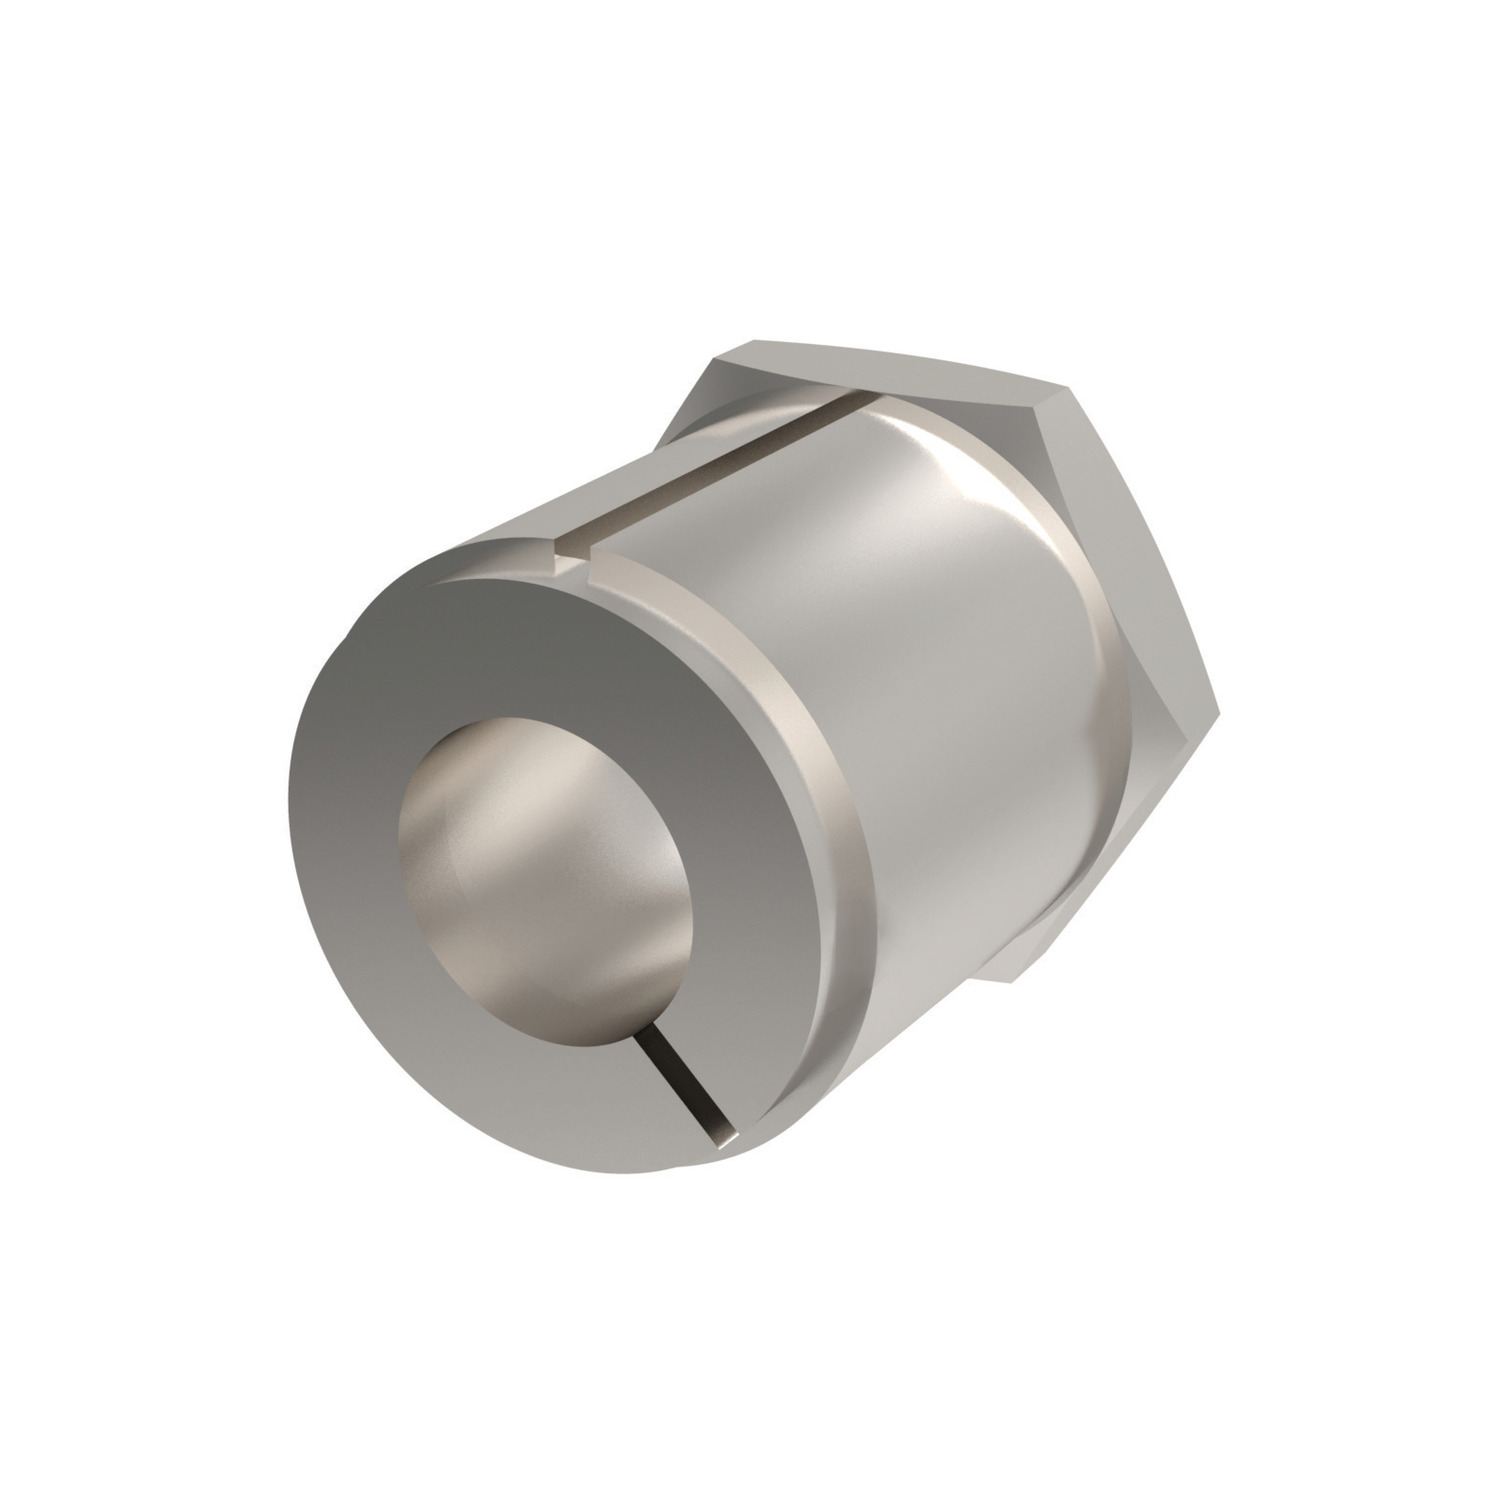 R3220 Stainless Taper Bushes